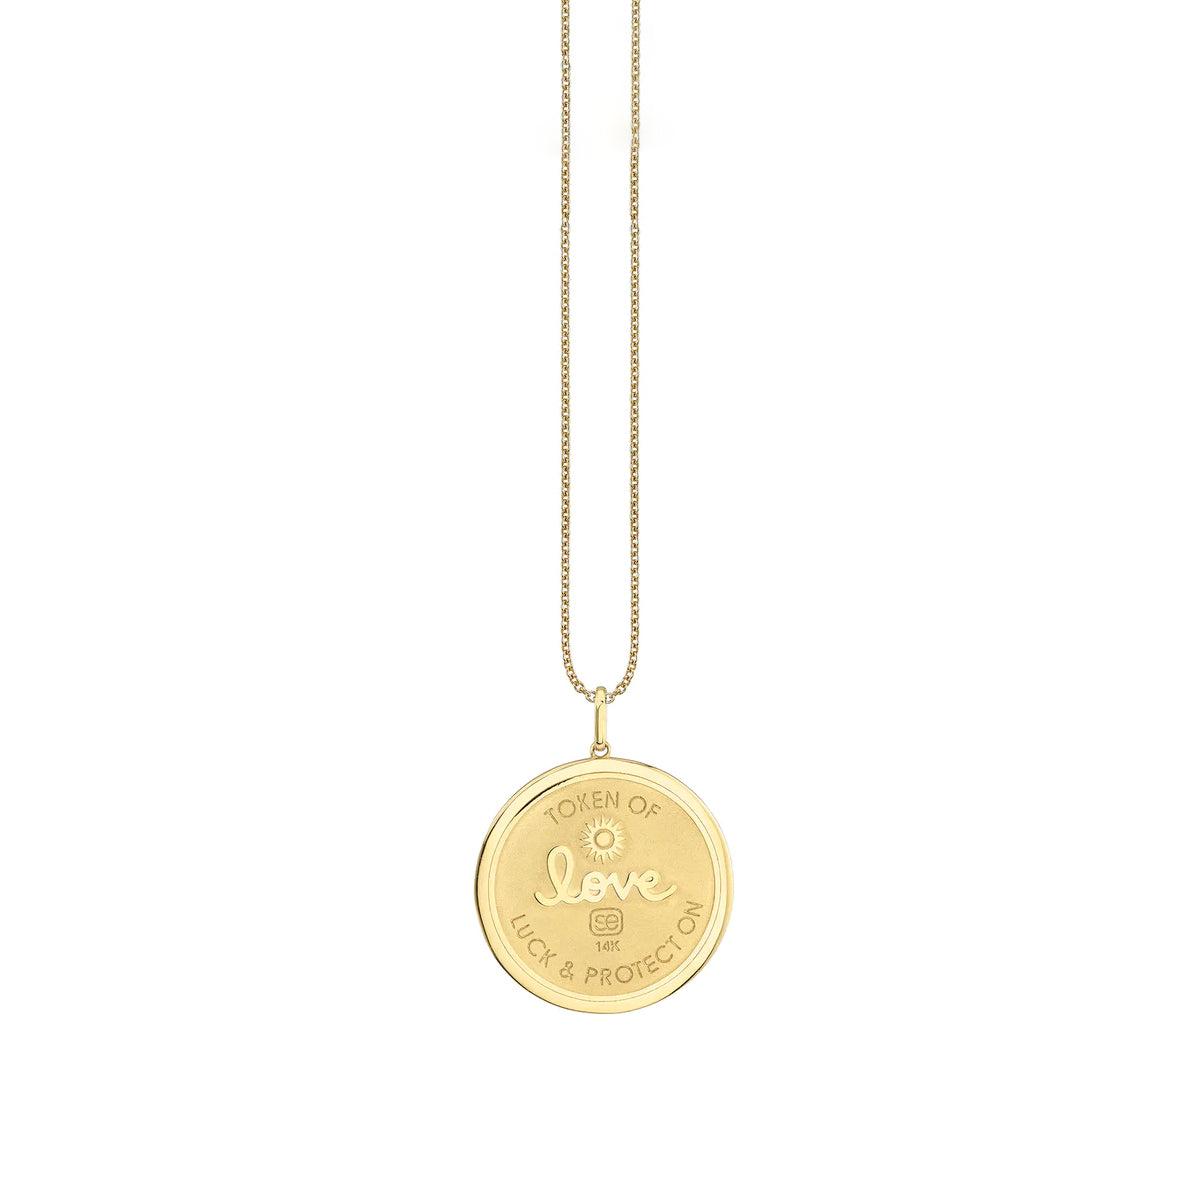 “Luck with Rays Coin” Pendant Necklace - Sydney Evan